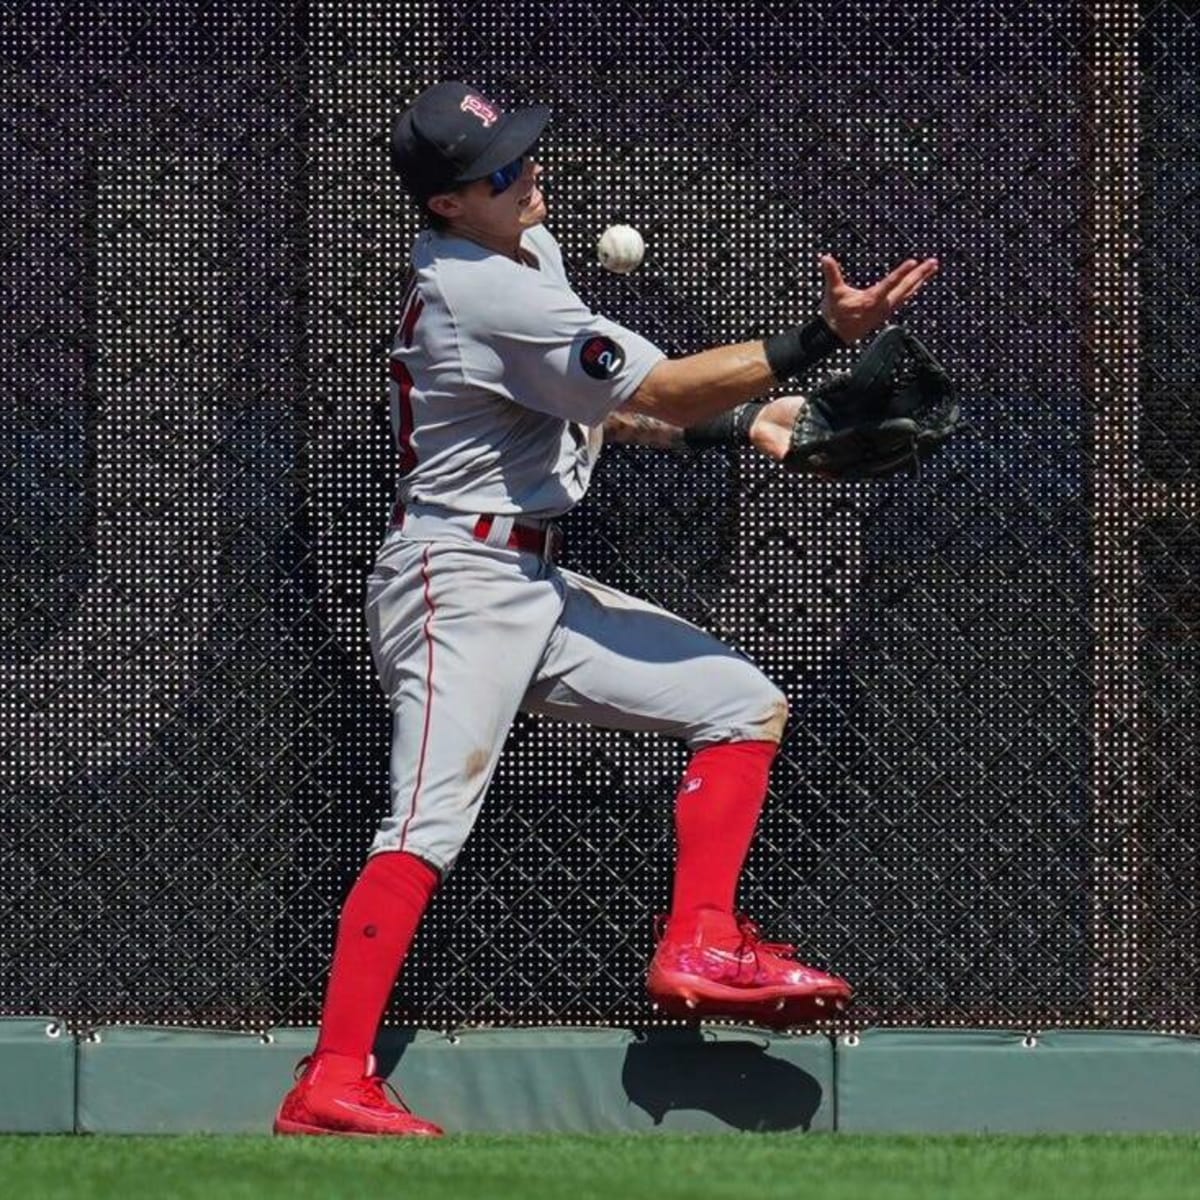 Jarren Duran's wild day in center field costs Red Sox in 13-5 loss